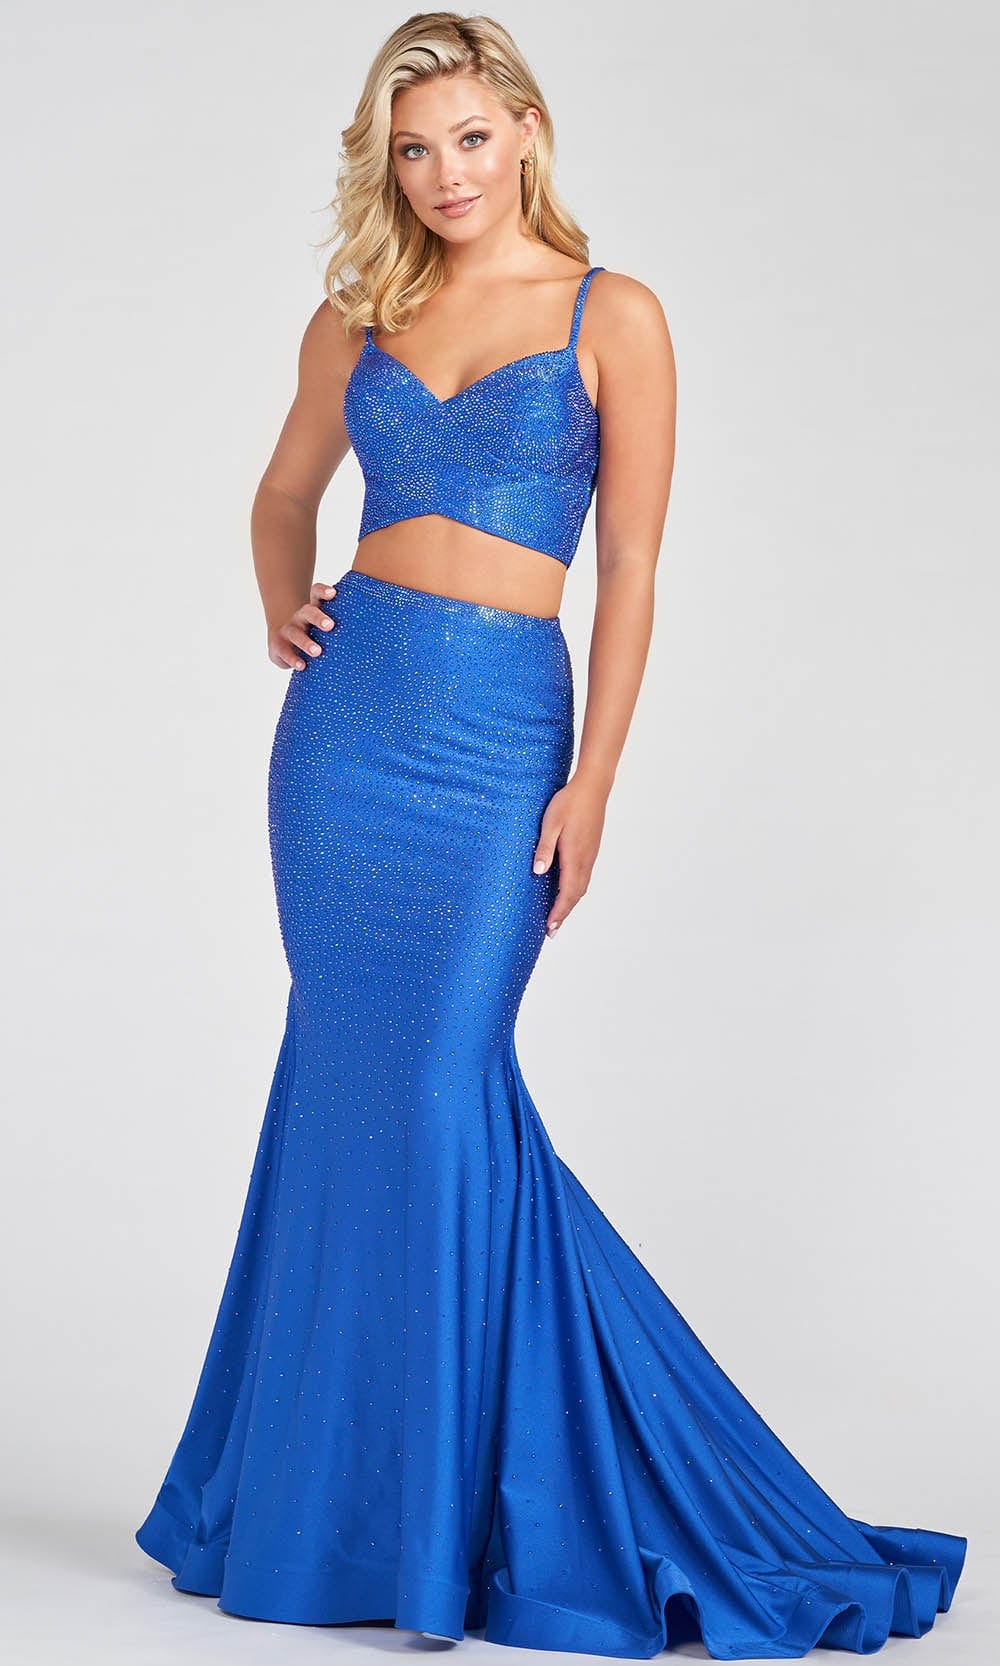 Ellie Wilde EW122013 - Two-Piece Beaded Prom Gown Special Occasion Dress 00 / Royal